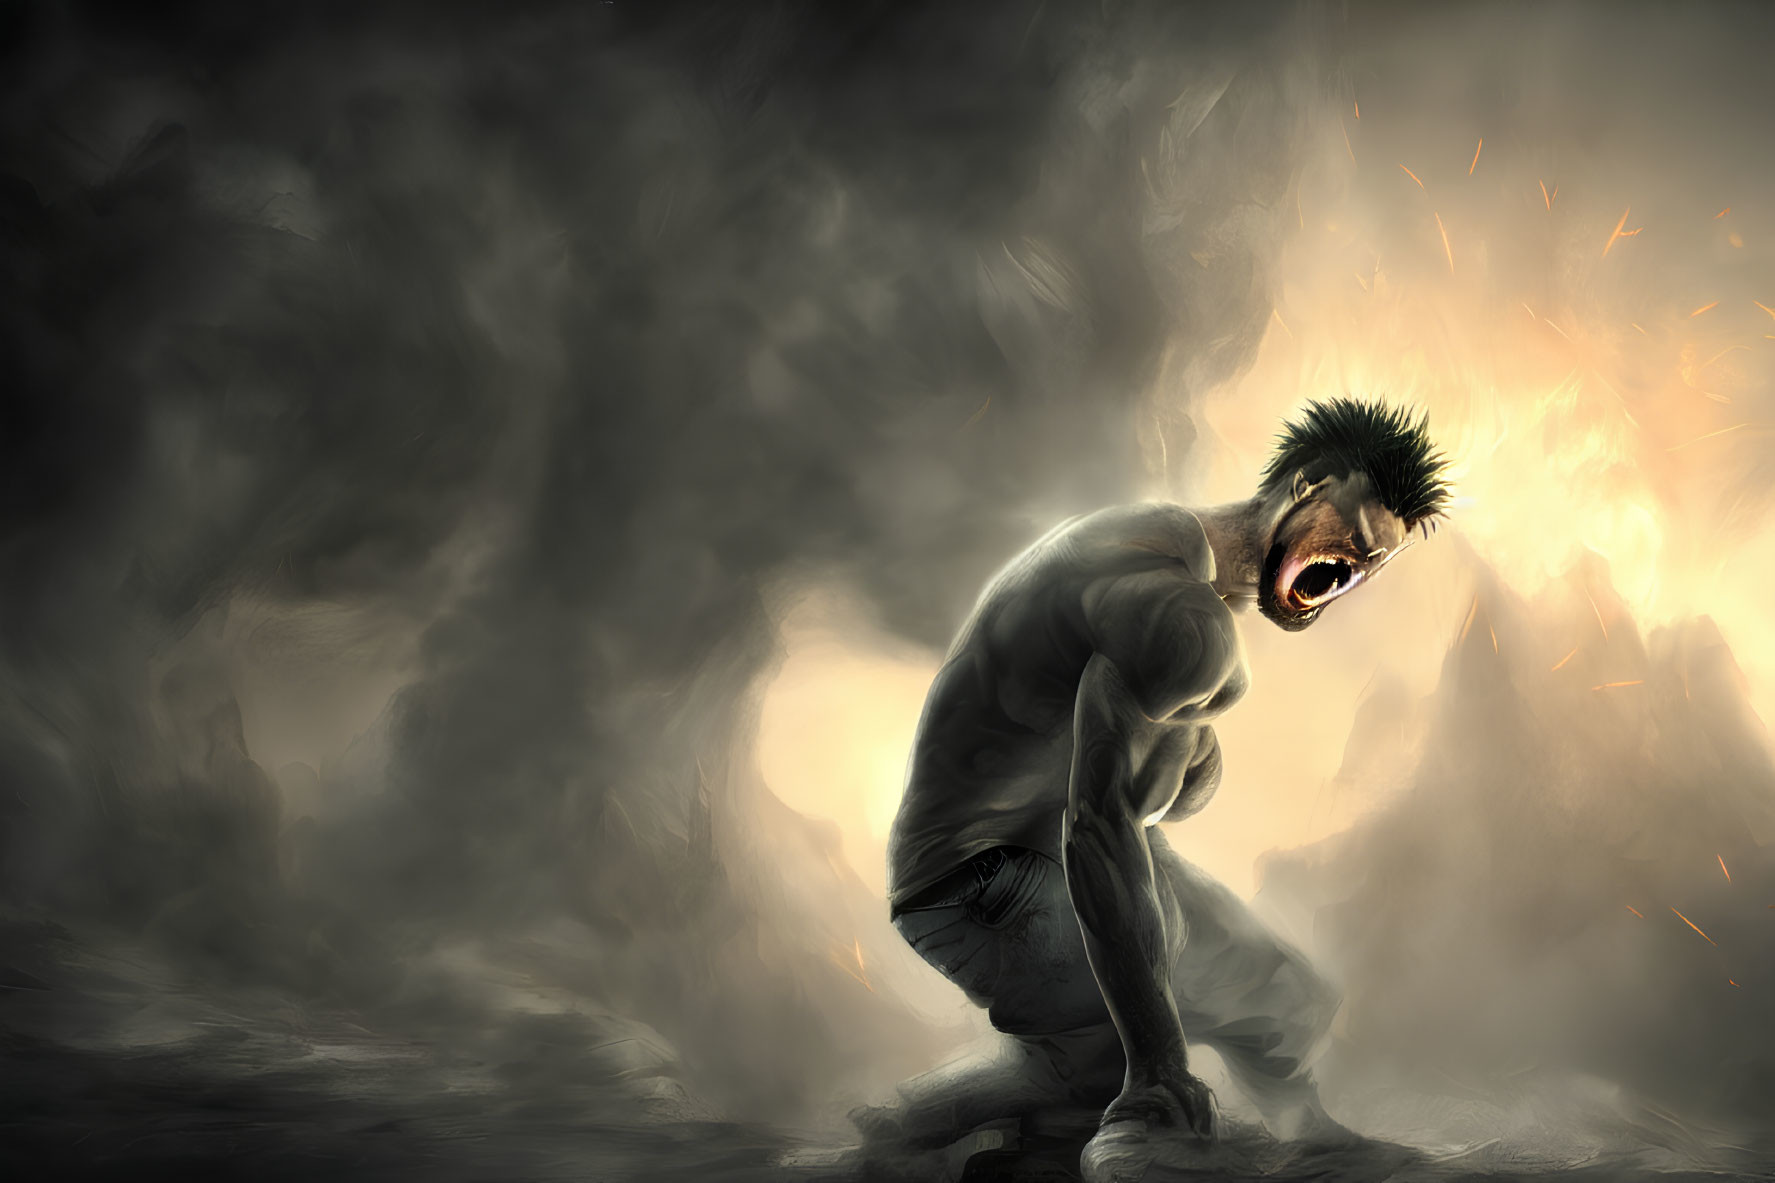 Man with anguished expression screaming in dark misty backdrop.